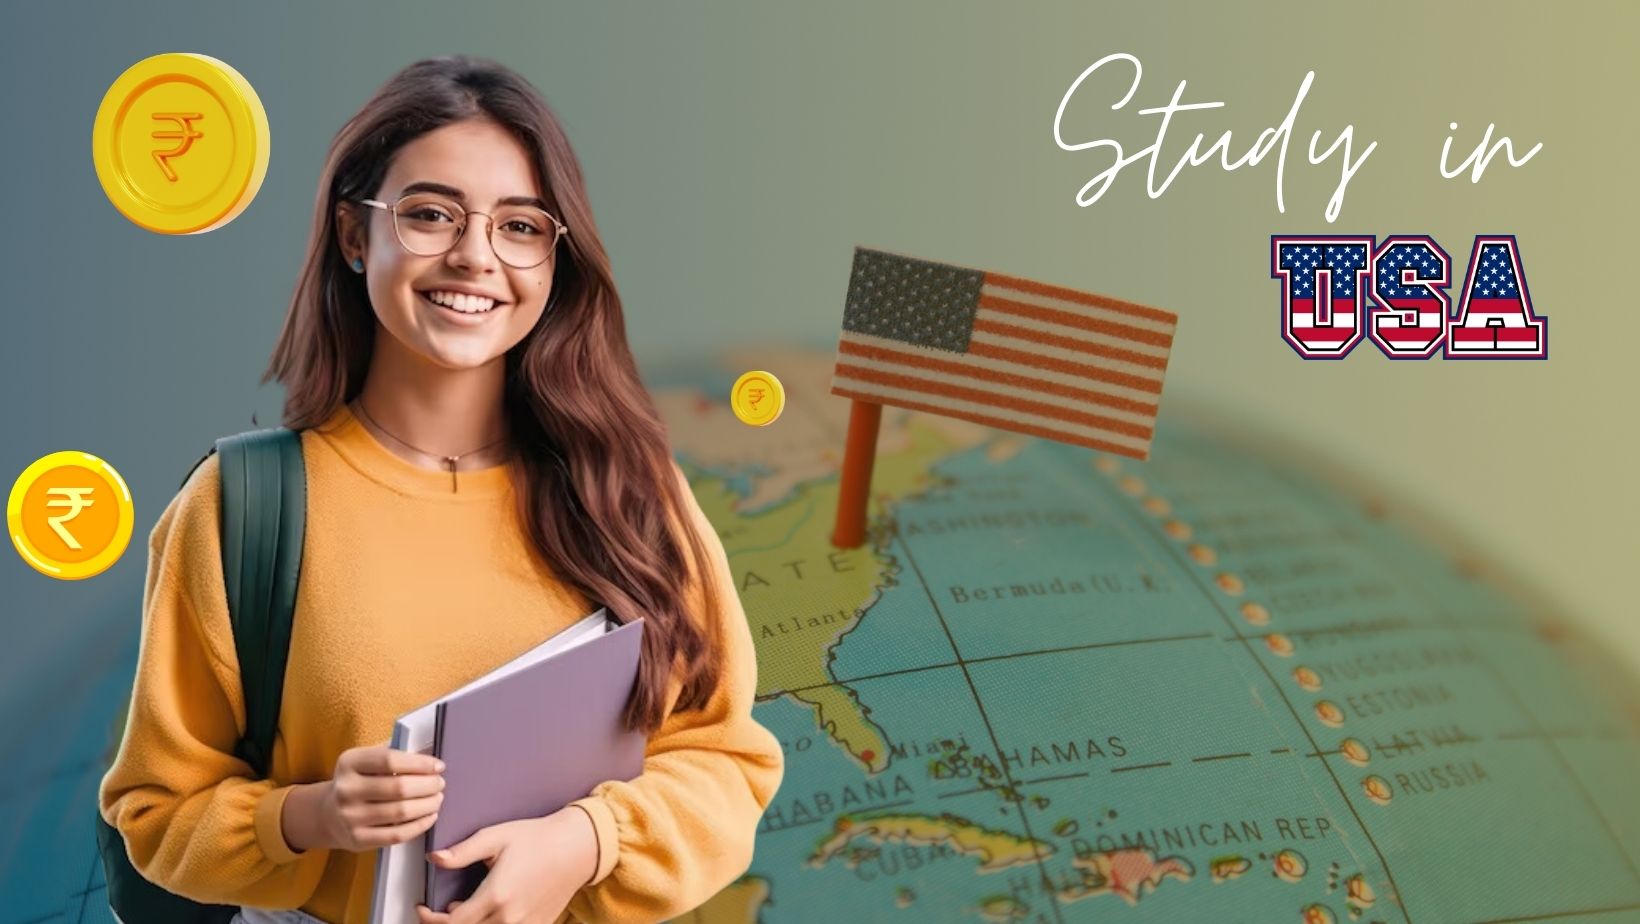 Overseas Education Loan to Study in the USA: A Loan Applicant’s Guide